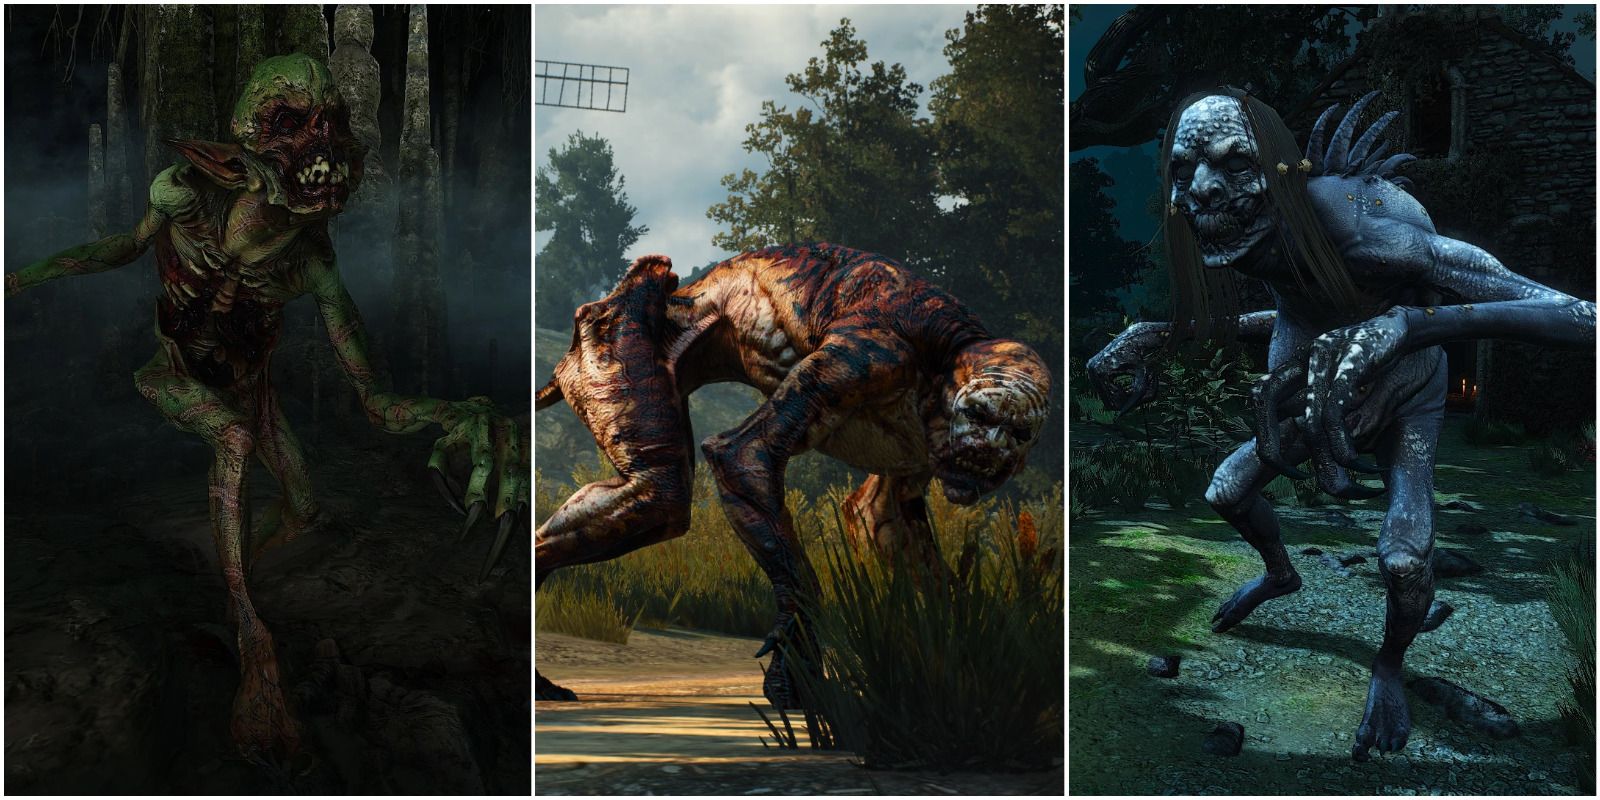 Foglet, Alghoul & Grave Hag From The Witcher 3